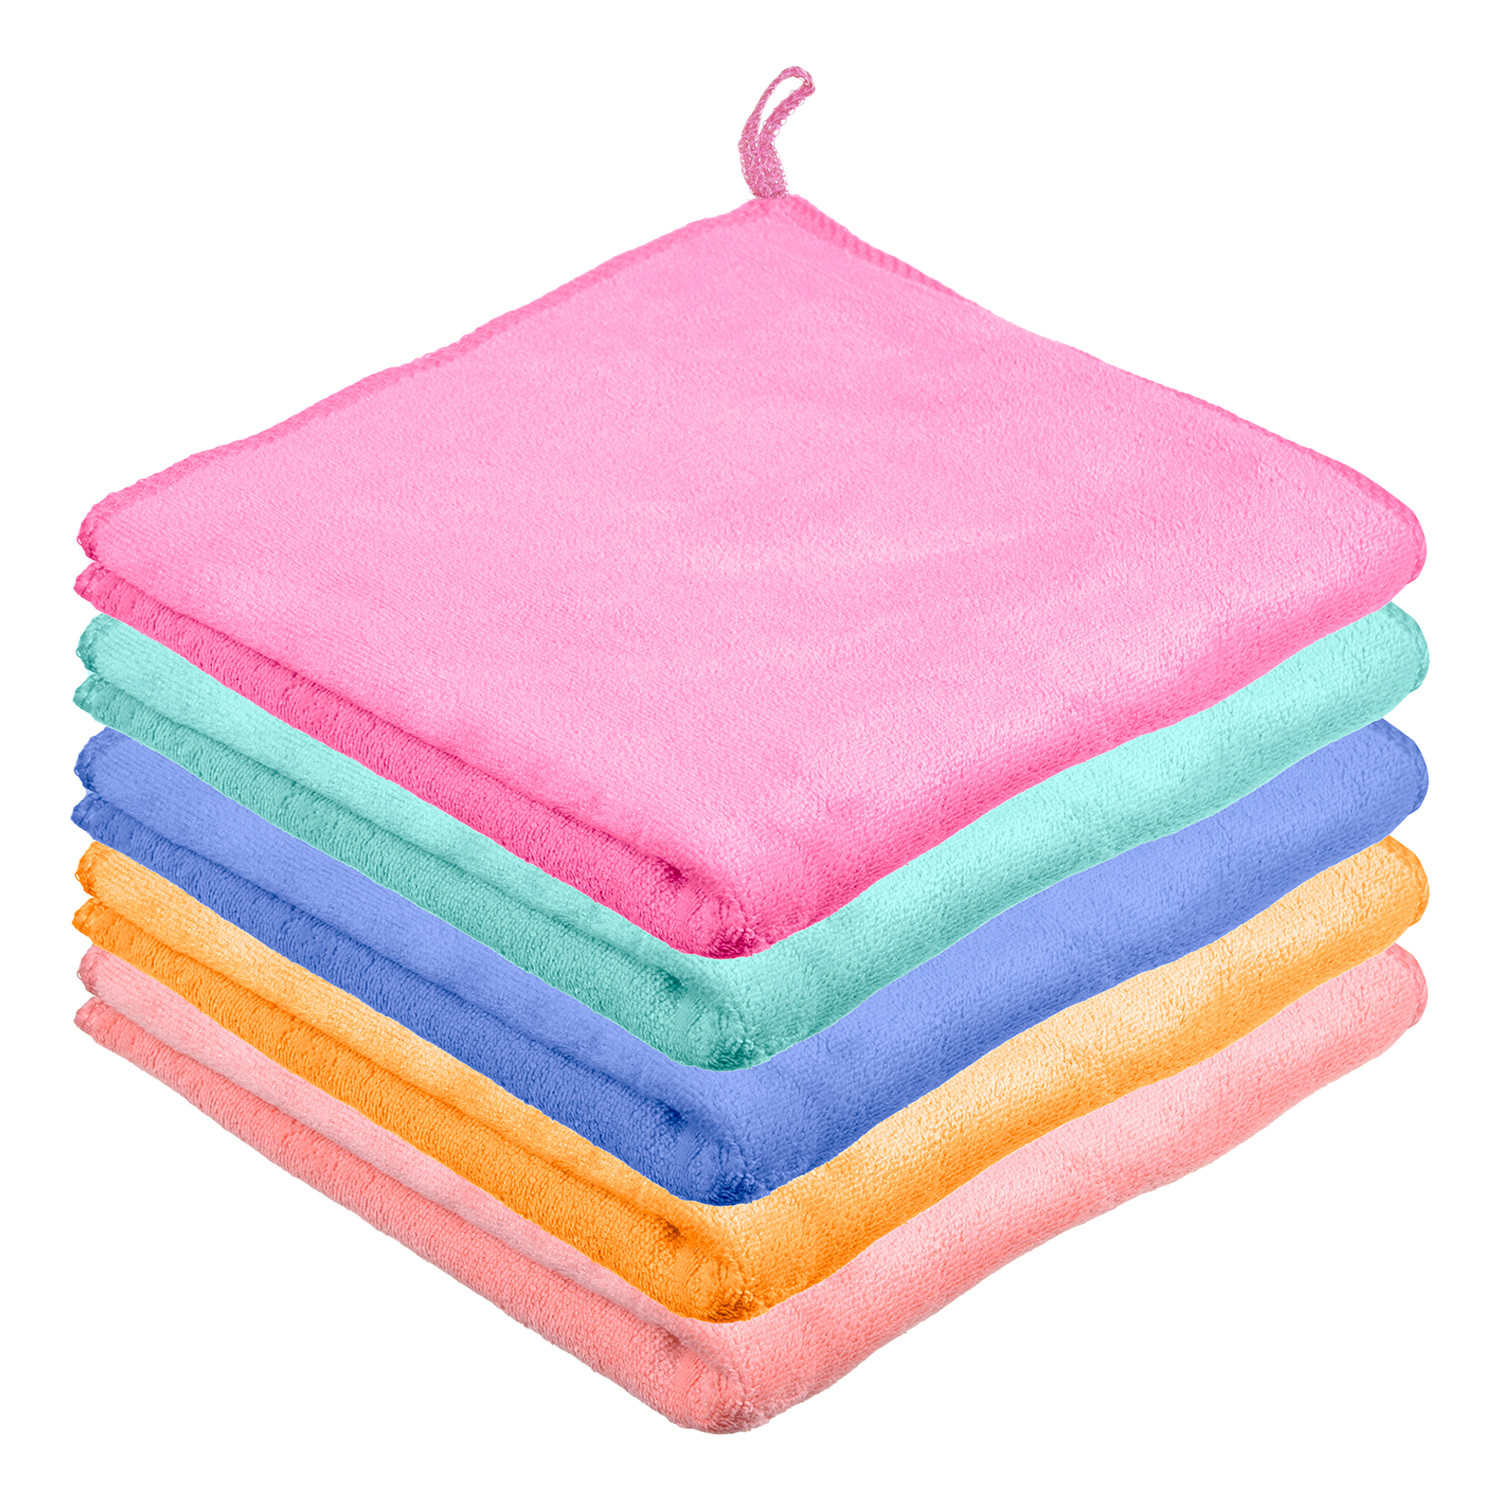 Kuber Industries Cleaning Towel|Microfiber Reusable Cloths|400 GSM Highly Absorbent Towel for Kitchen With Hanging Loop|Car|Window|40x40 Cm (Multicolor)